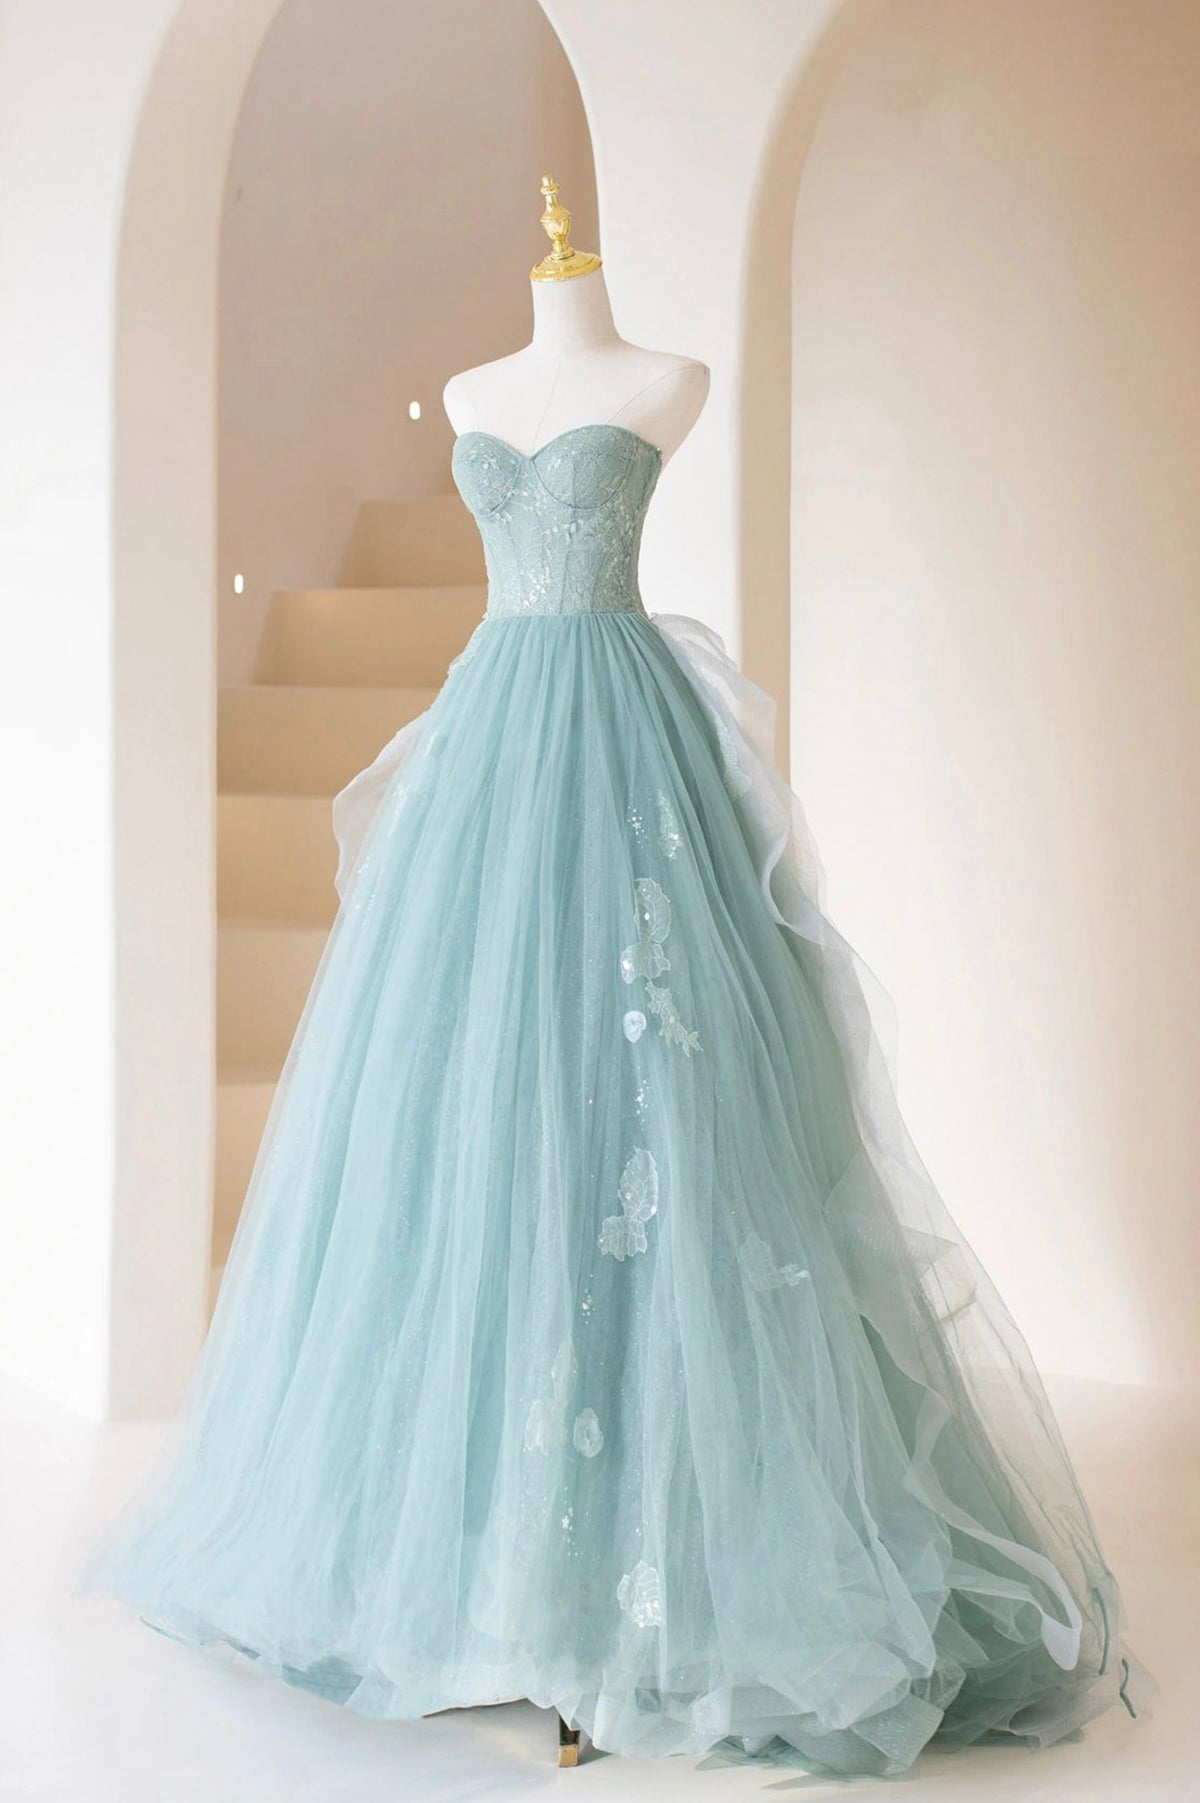 Lovely Sweetheart Neckline Tulle Long Prom Dress with Lace, Beautiful Strapless Evening Dress